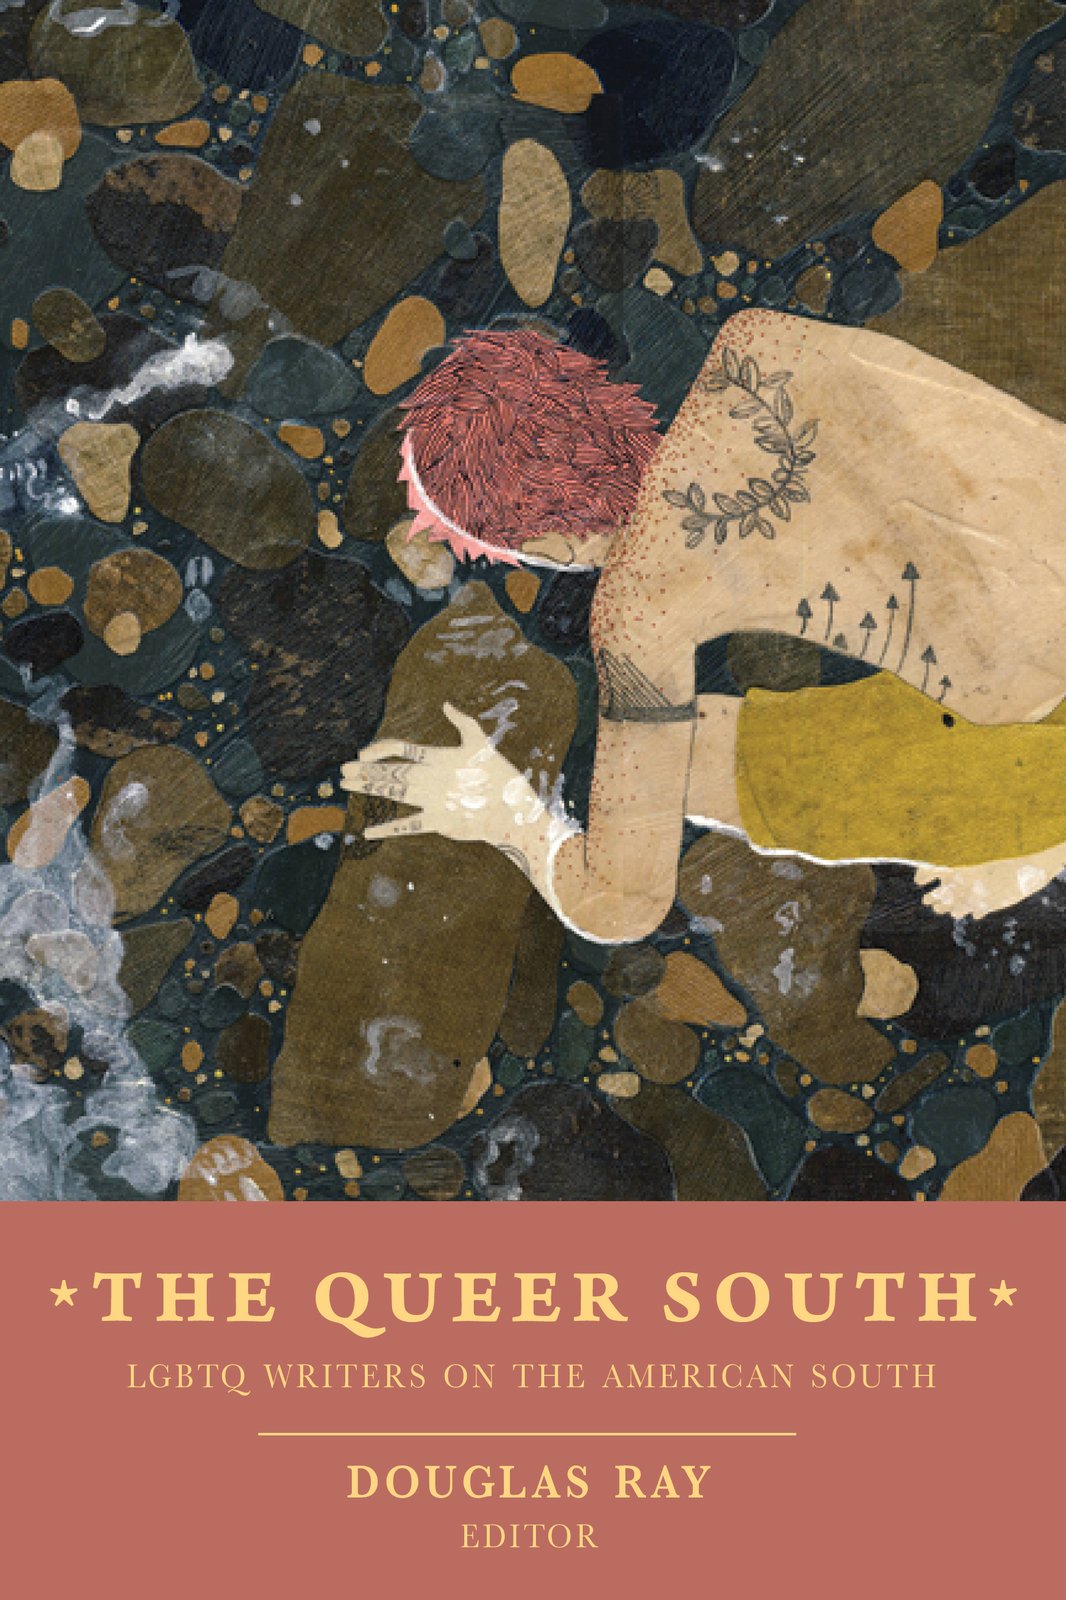 The Queer South by Douglas Ray